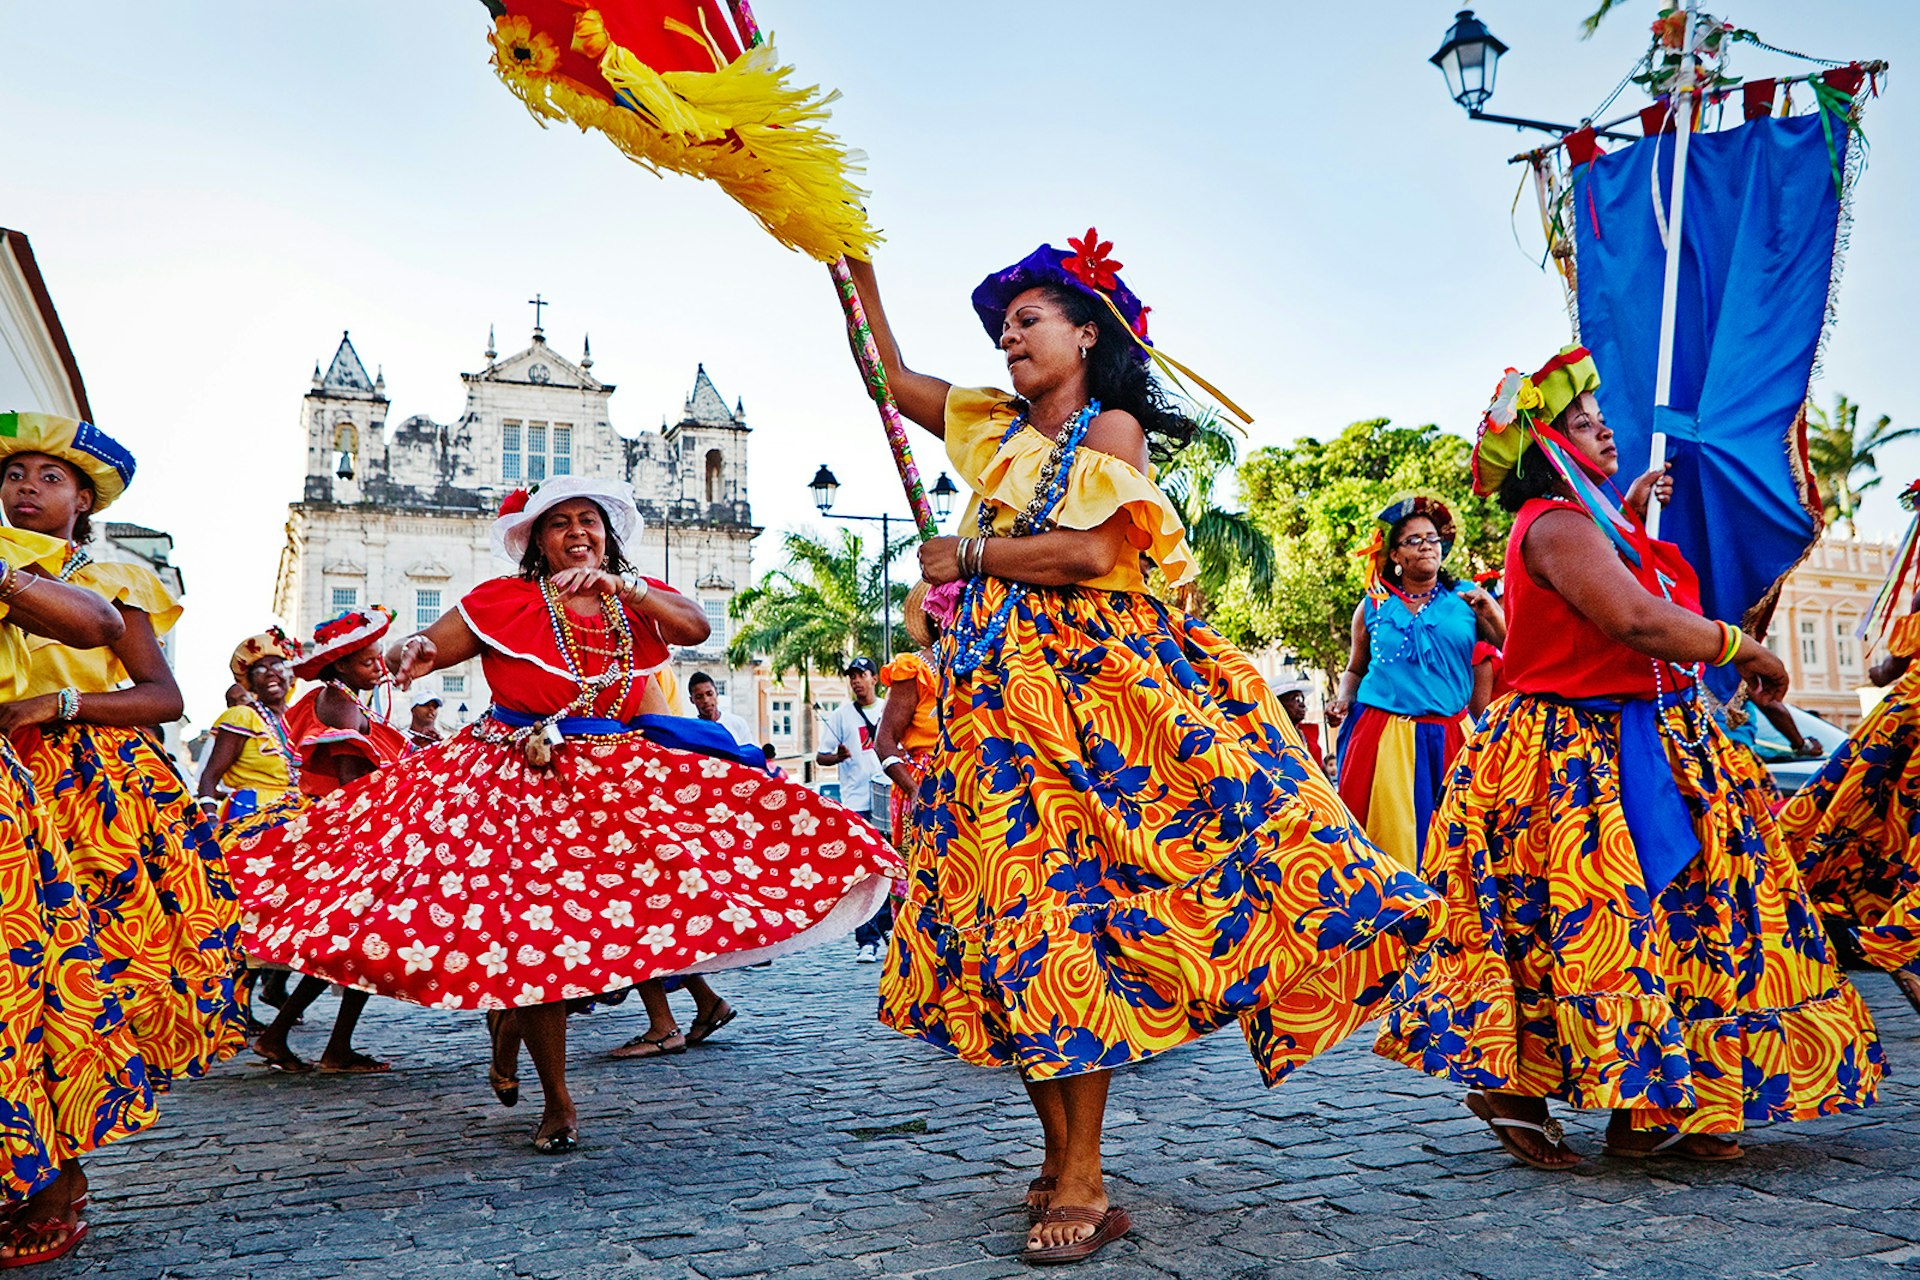 Women in colorful patterned skirts dance on a cobblestone street